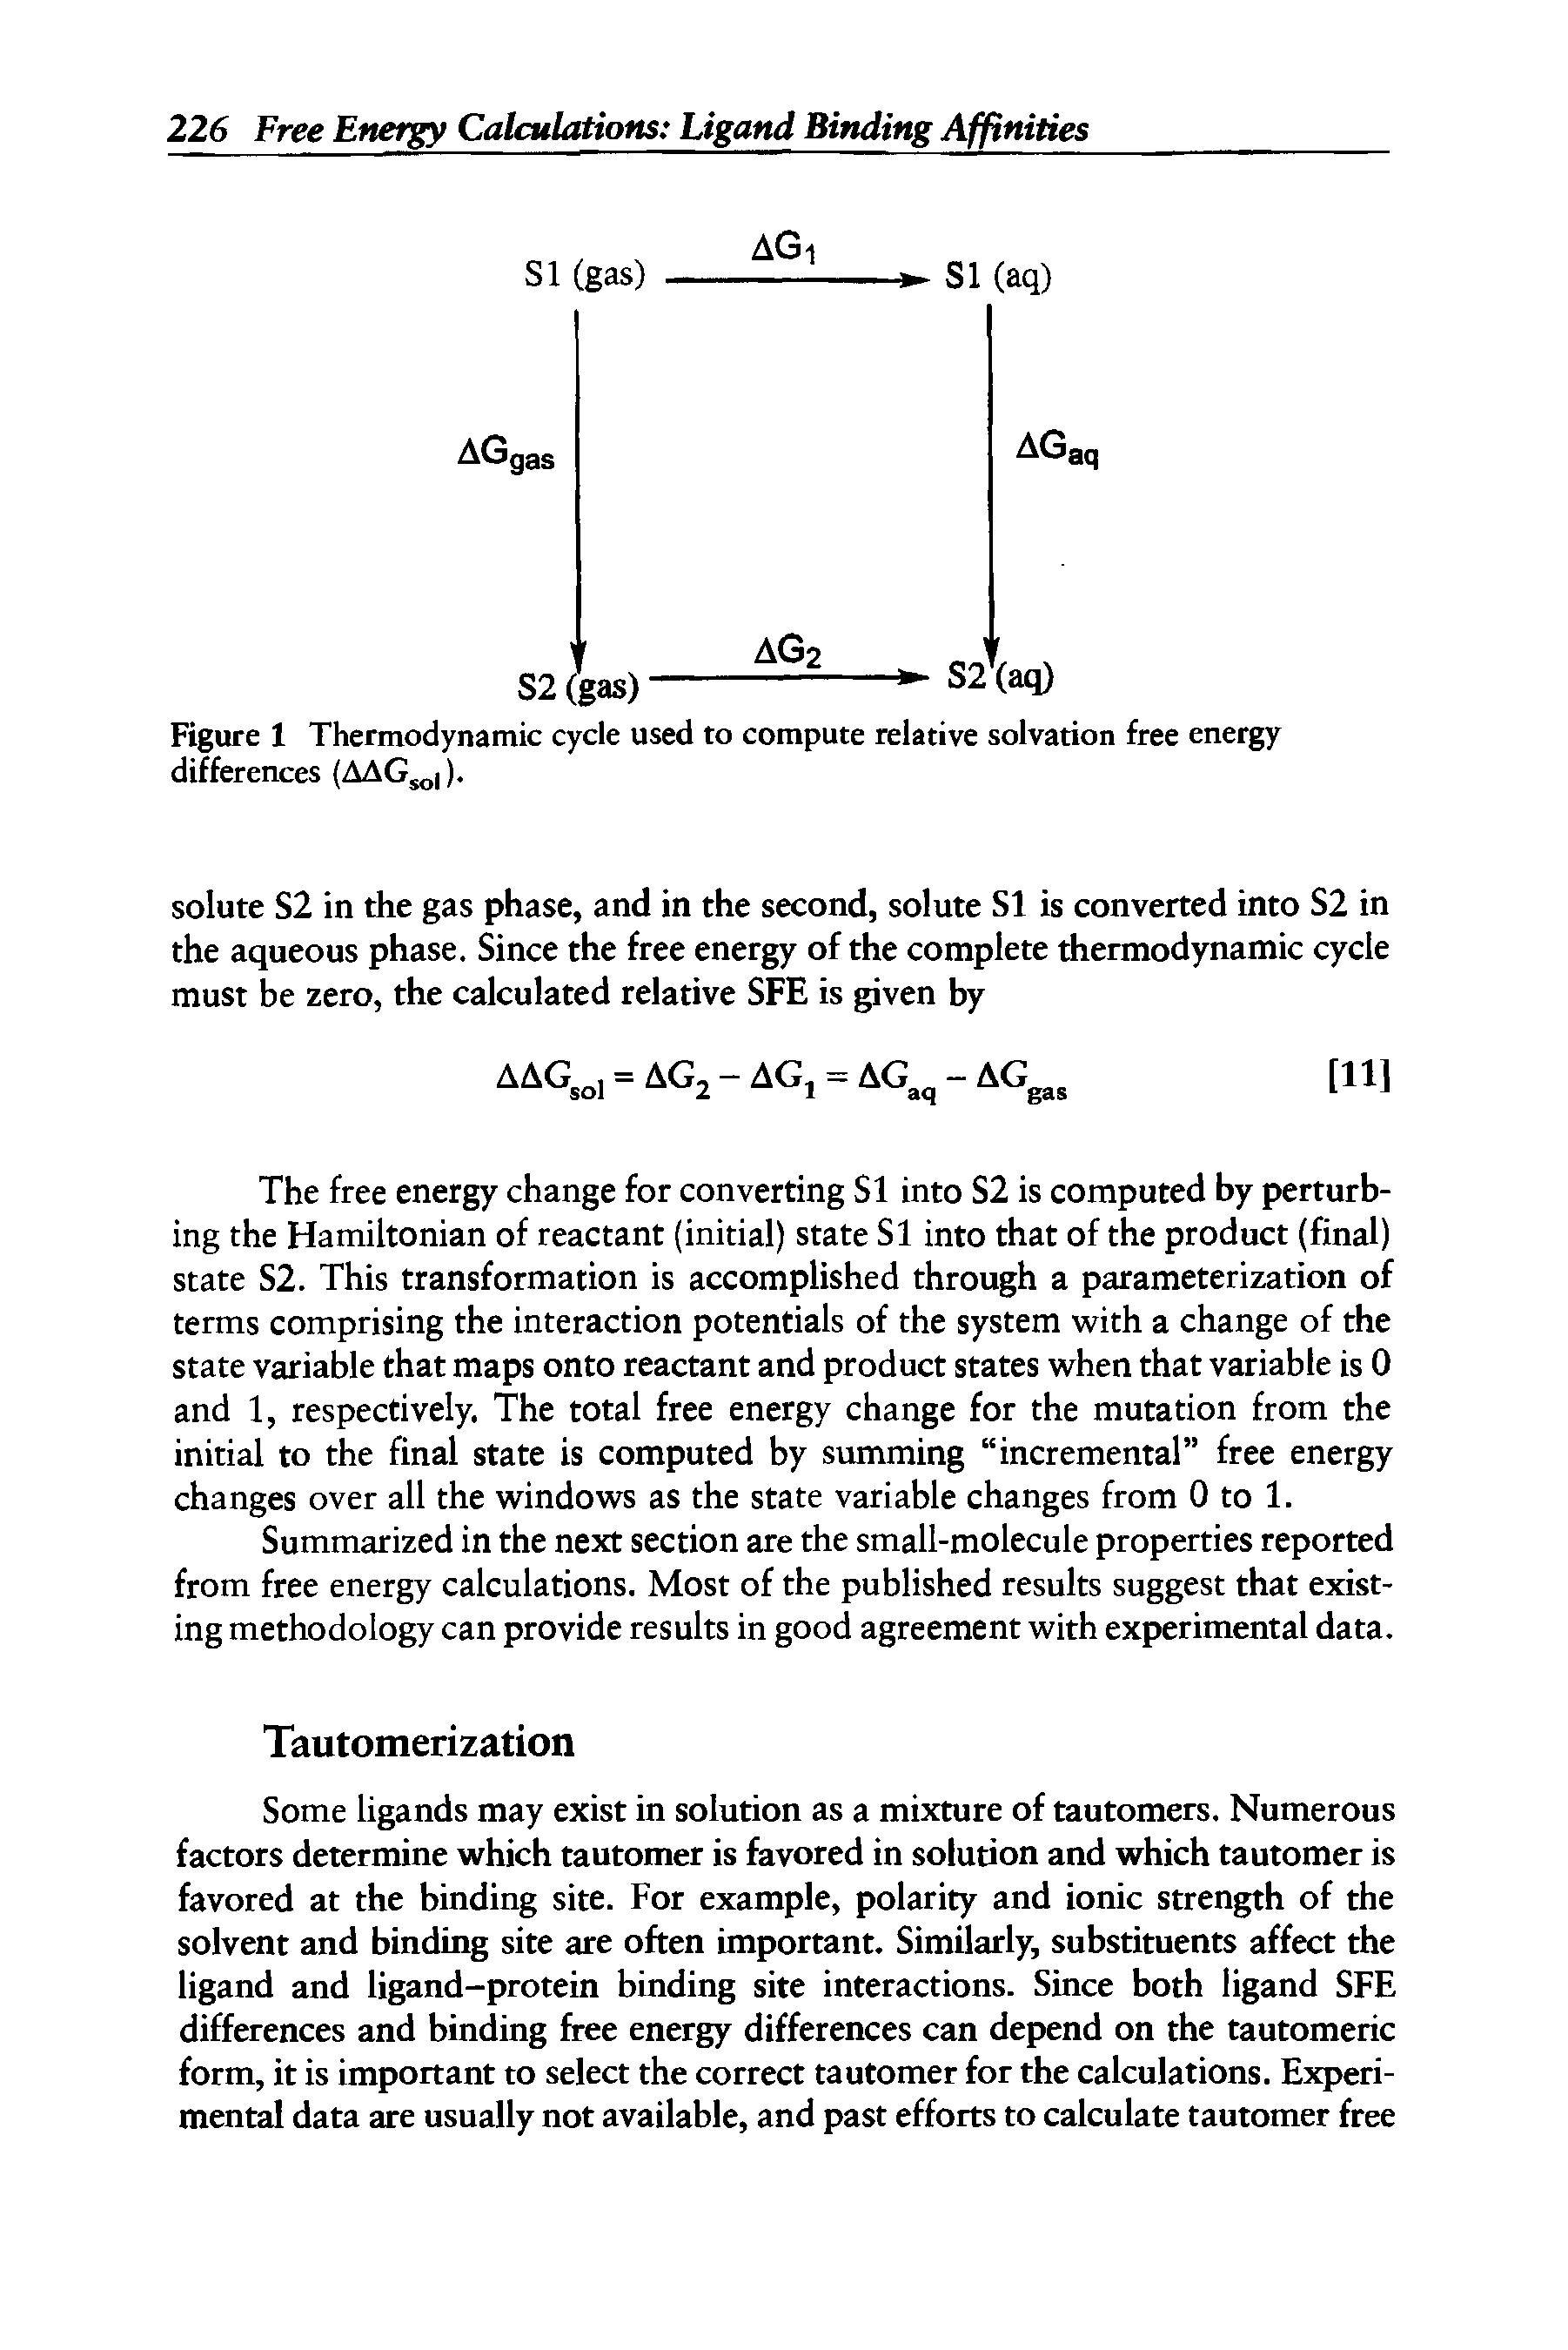 Figure 1 Thermodynamic cycle used to compute relative solvation free energy differences (AAG /).